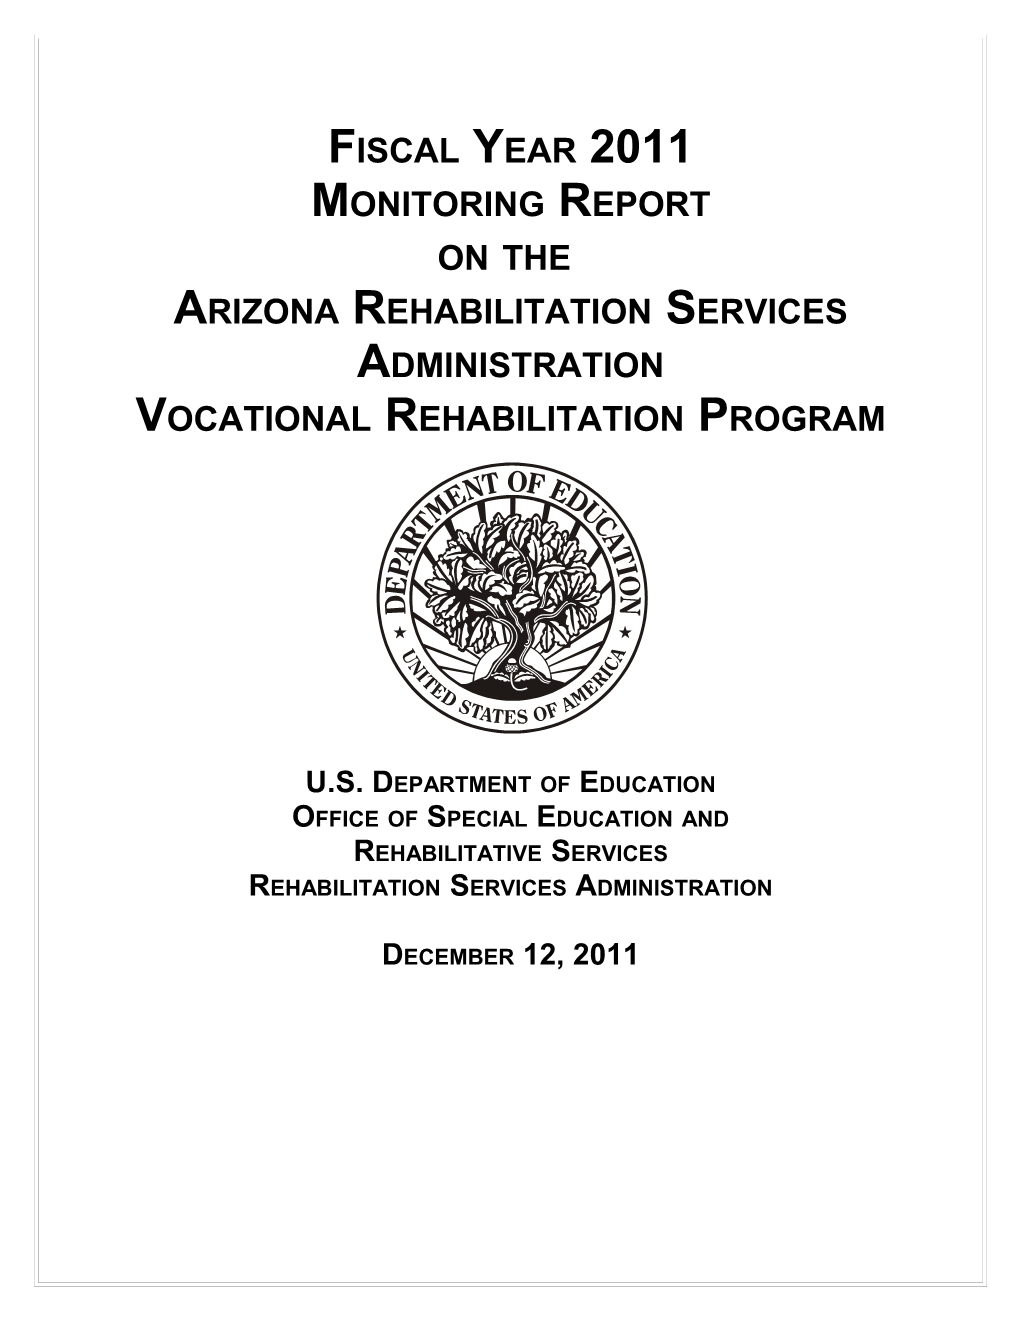 Fiscal Year 2011 Monitoring Report on the Vocational Rehabilitation Program (MS Word)